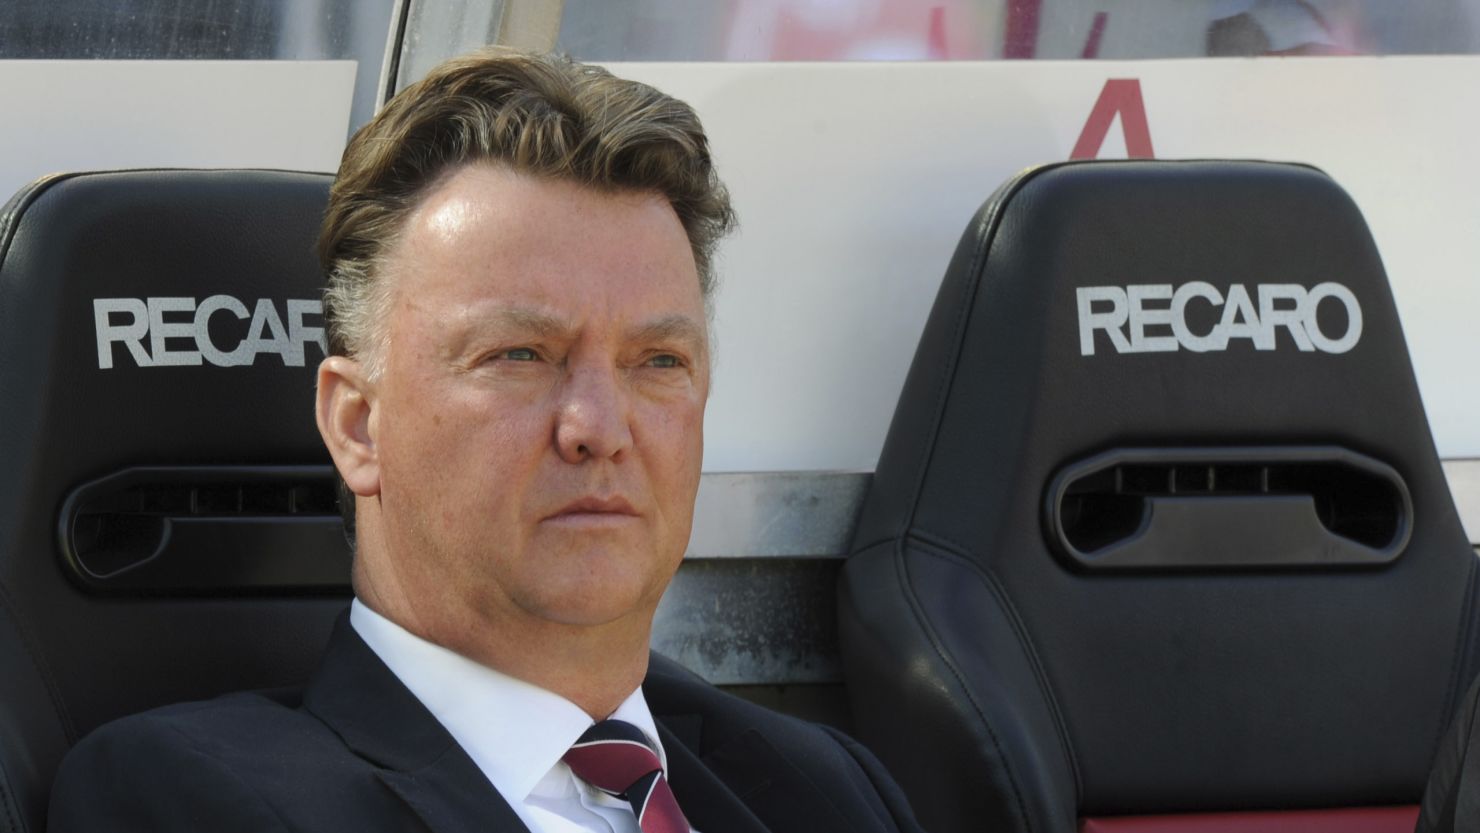 Louis van Gaal will be returning to the Dutch dugout after being appointed national coach for the second time.